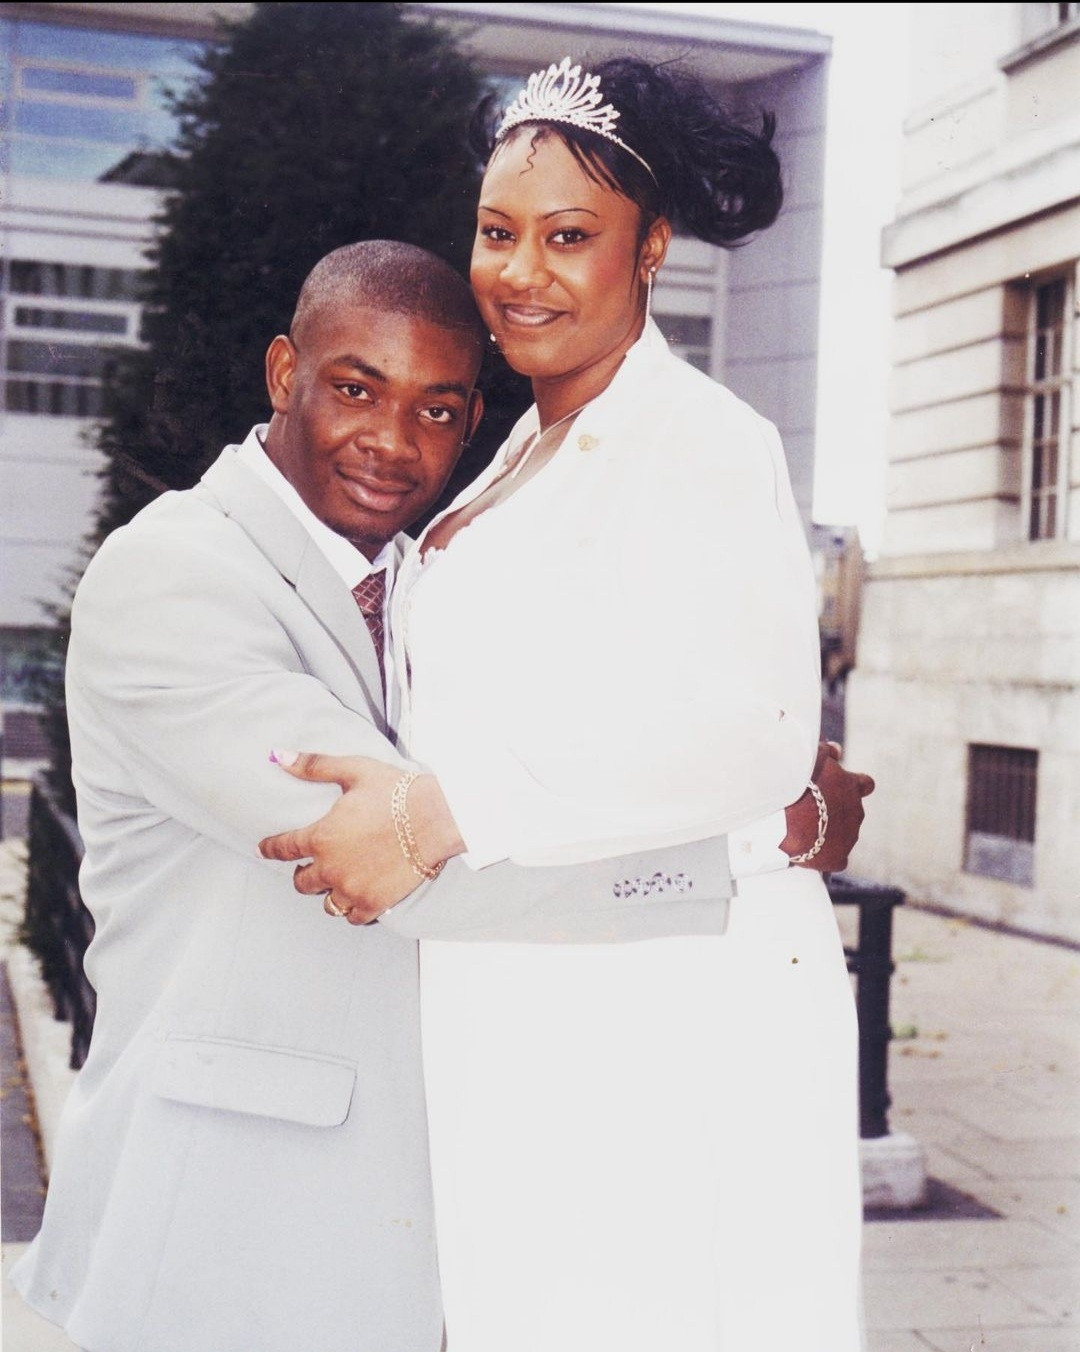 Don Jazzy reveals he was married at age 20 to model, Michelle Jackson, and explains why it ended in divorce